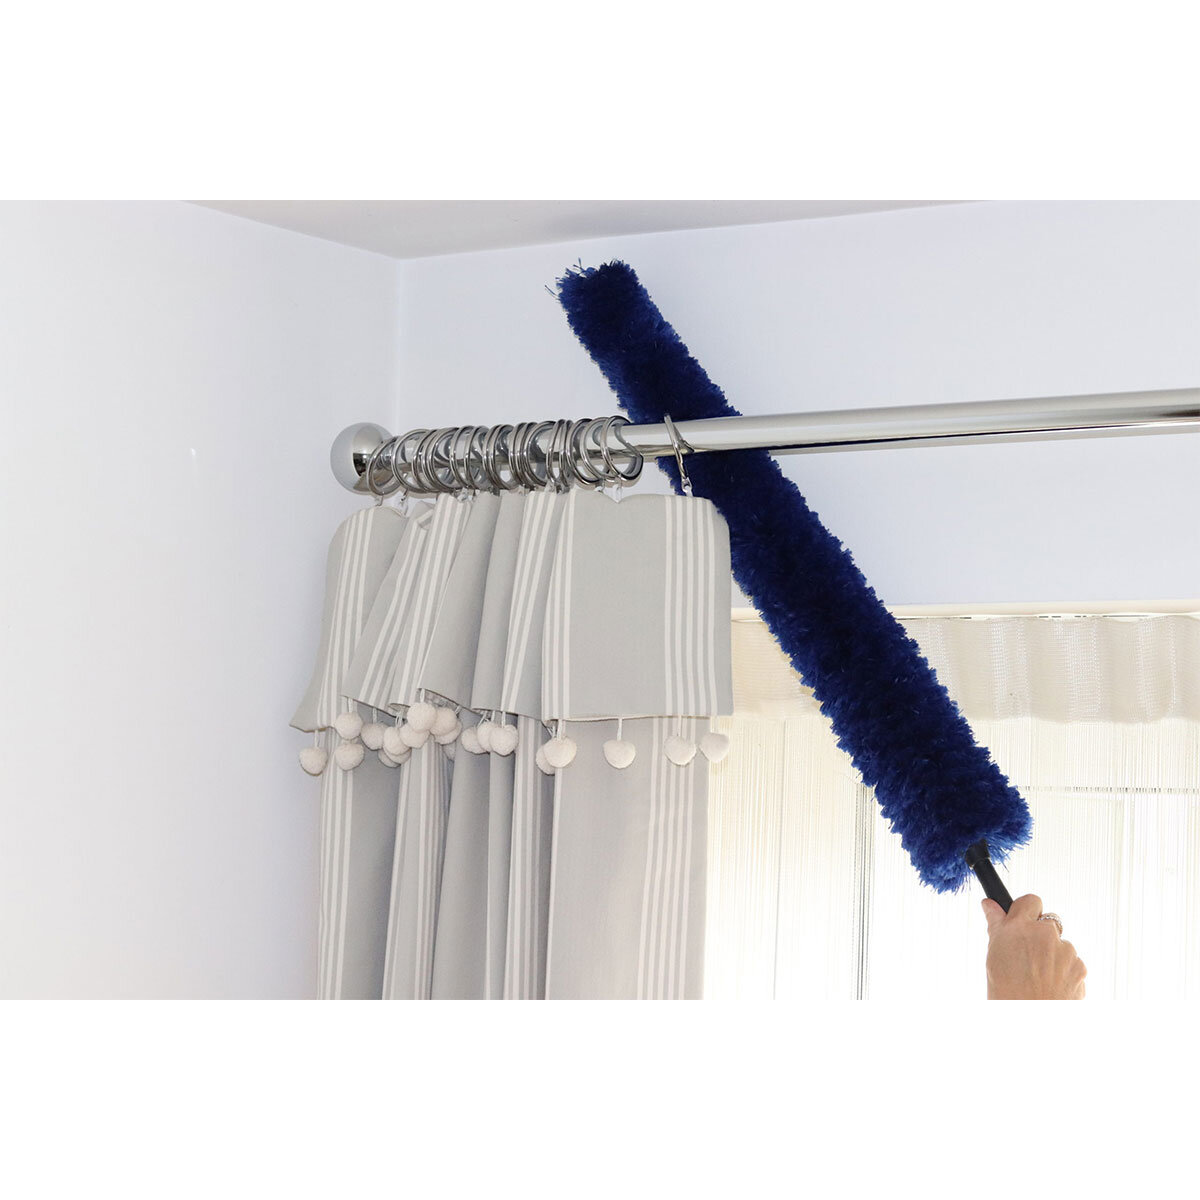 Lifestyle image of duster being used to clean